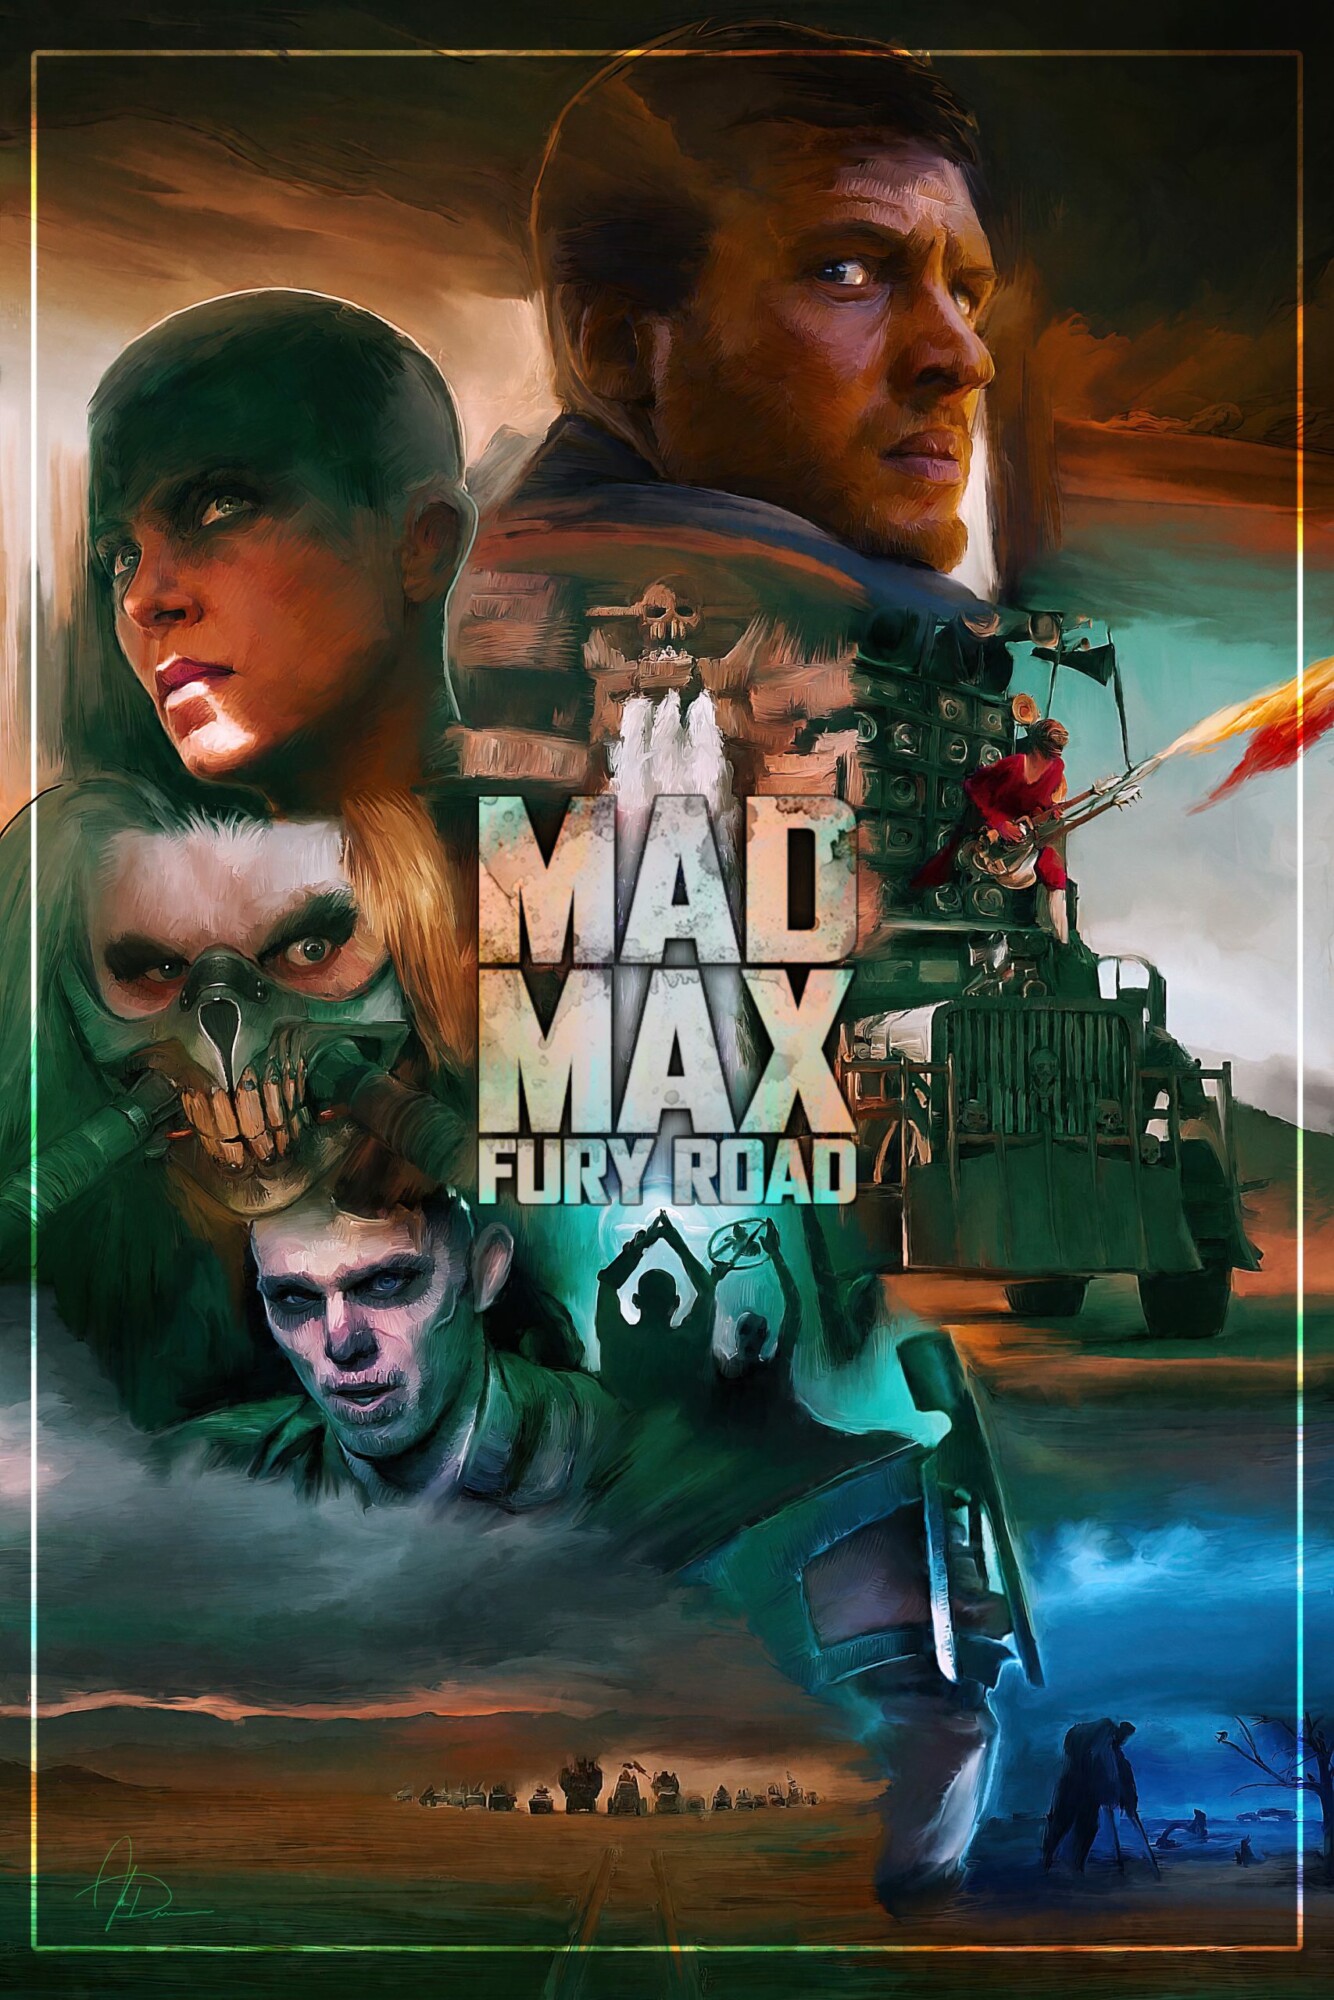 mad max 2022 poster